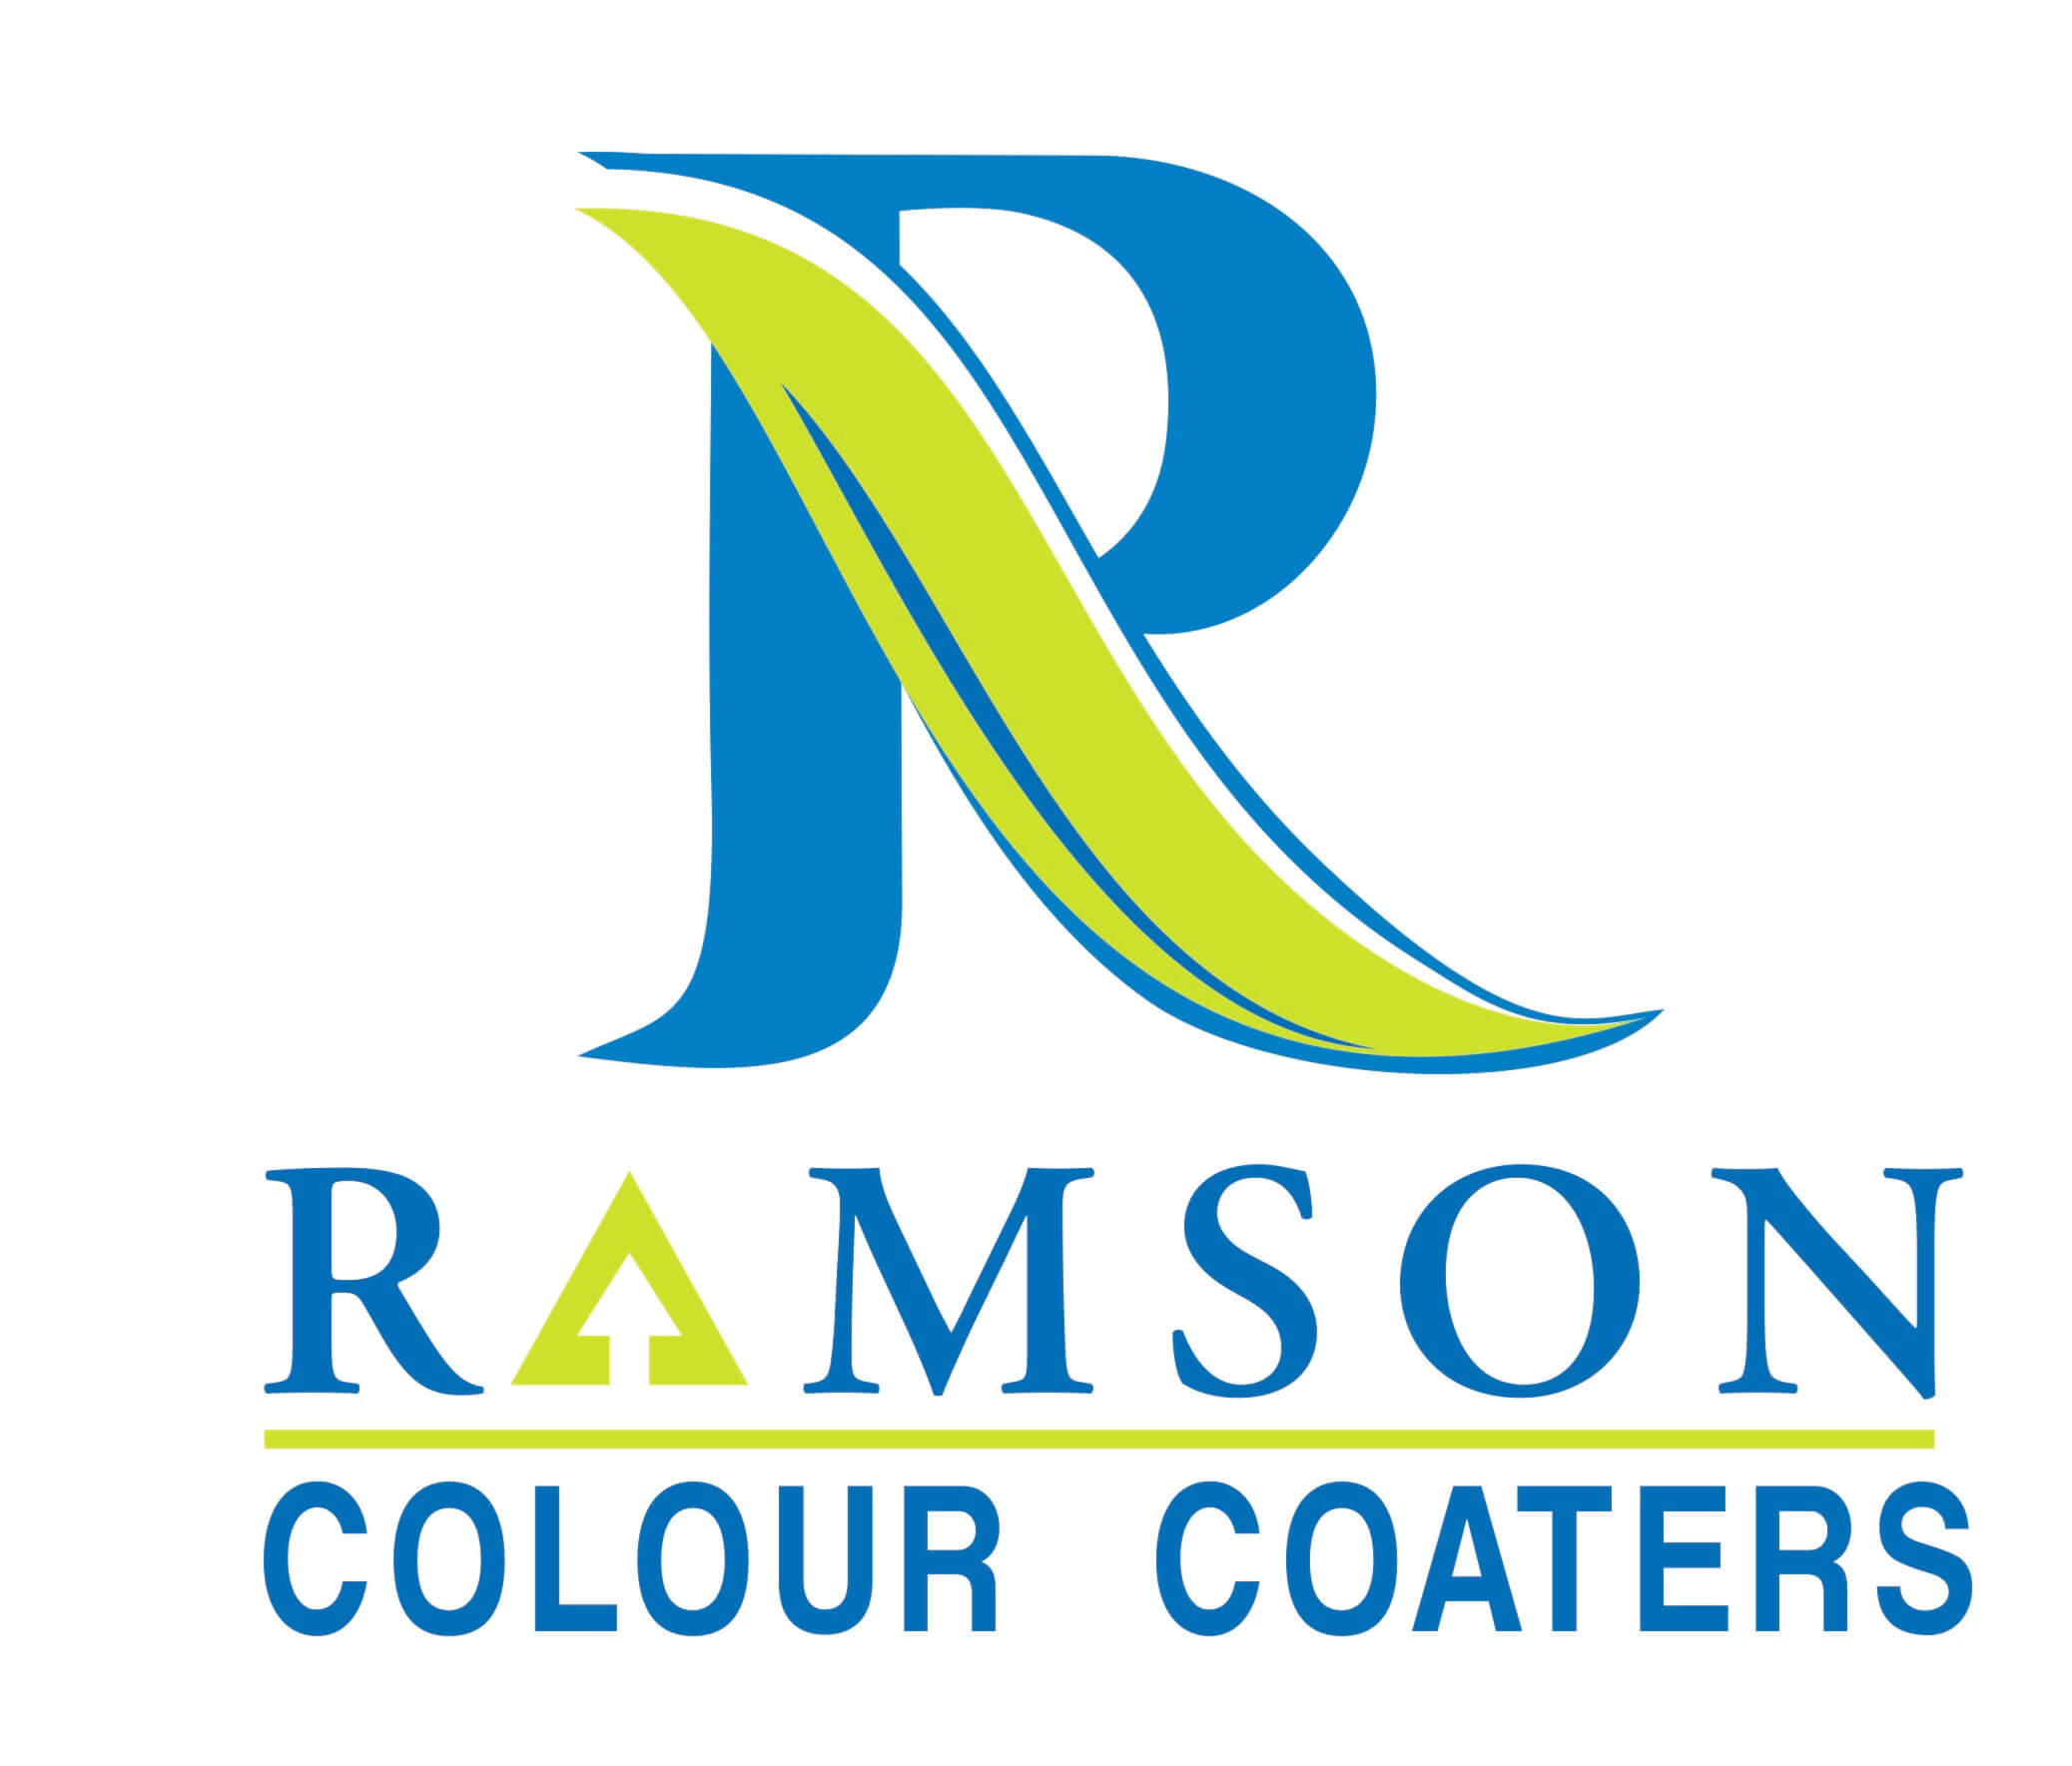 Ramson Color Coaters